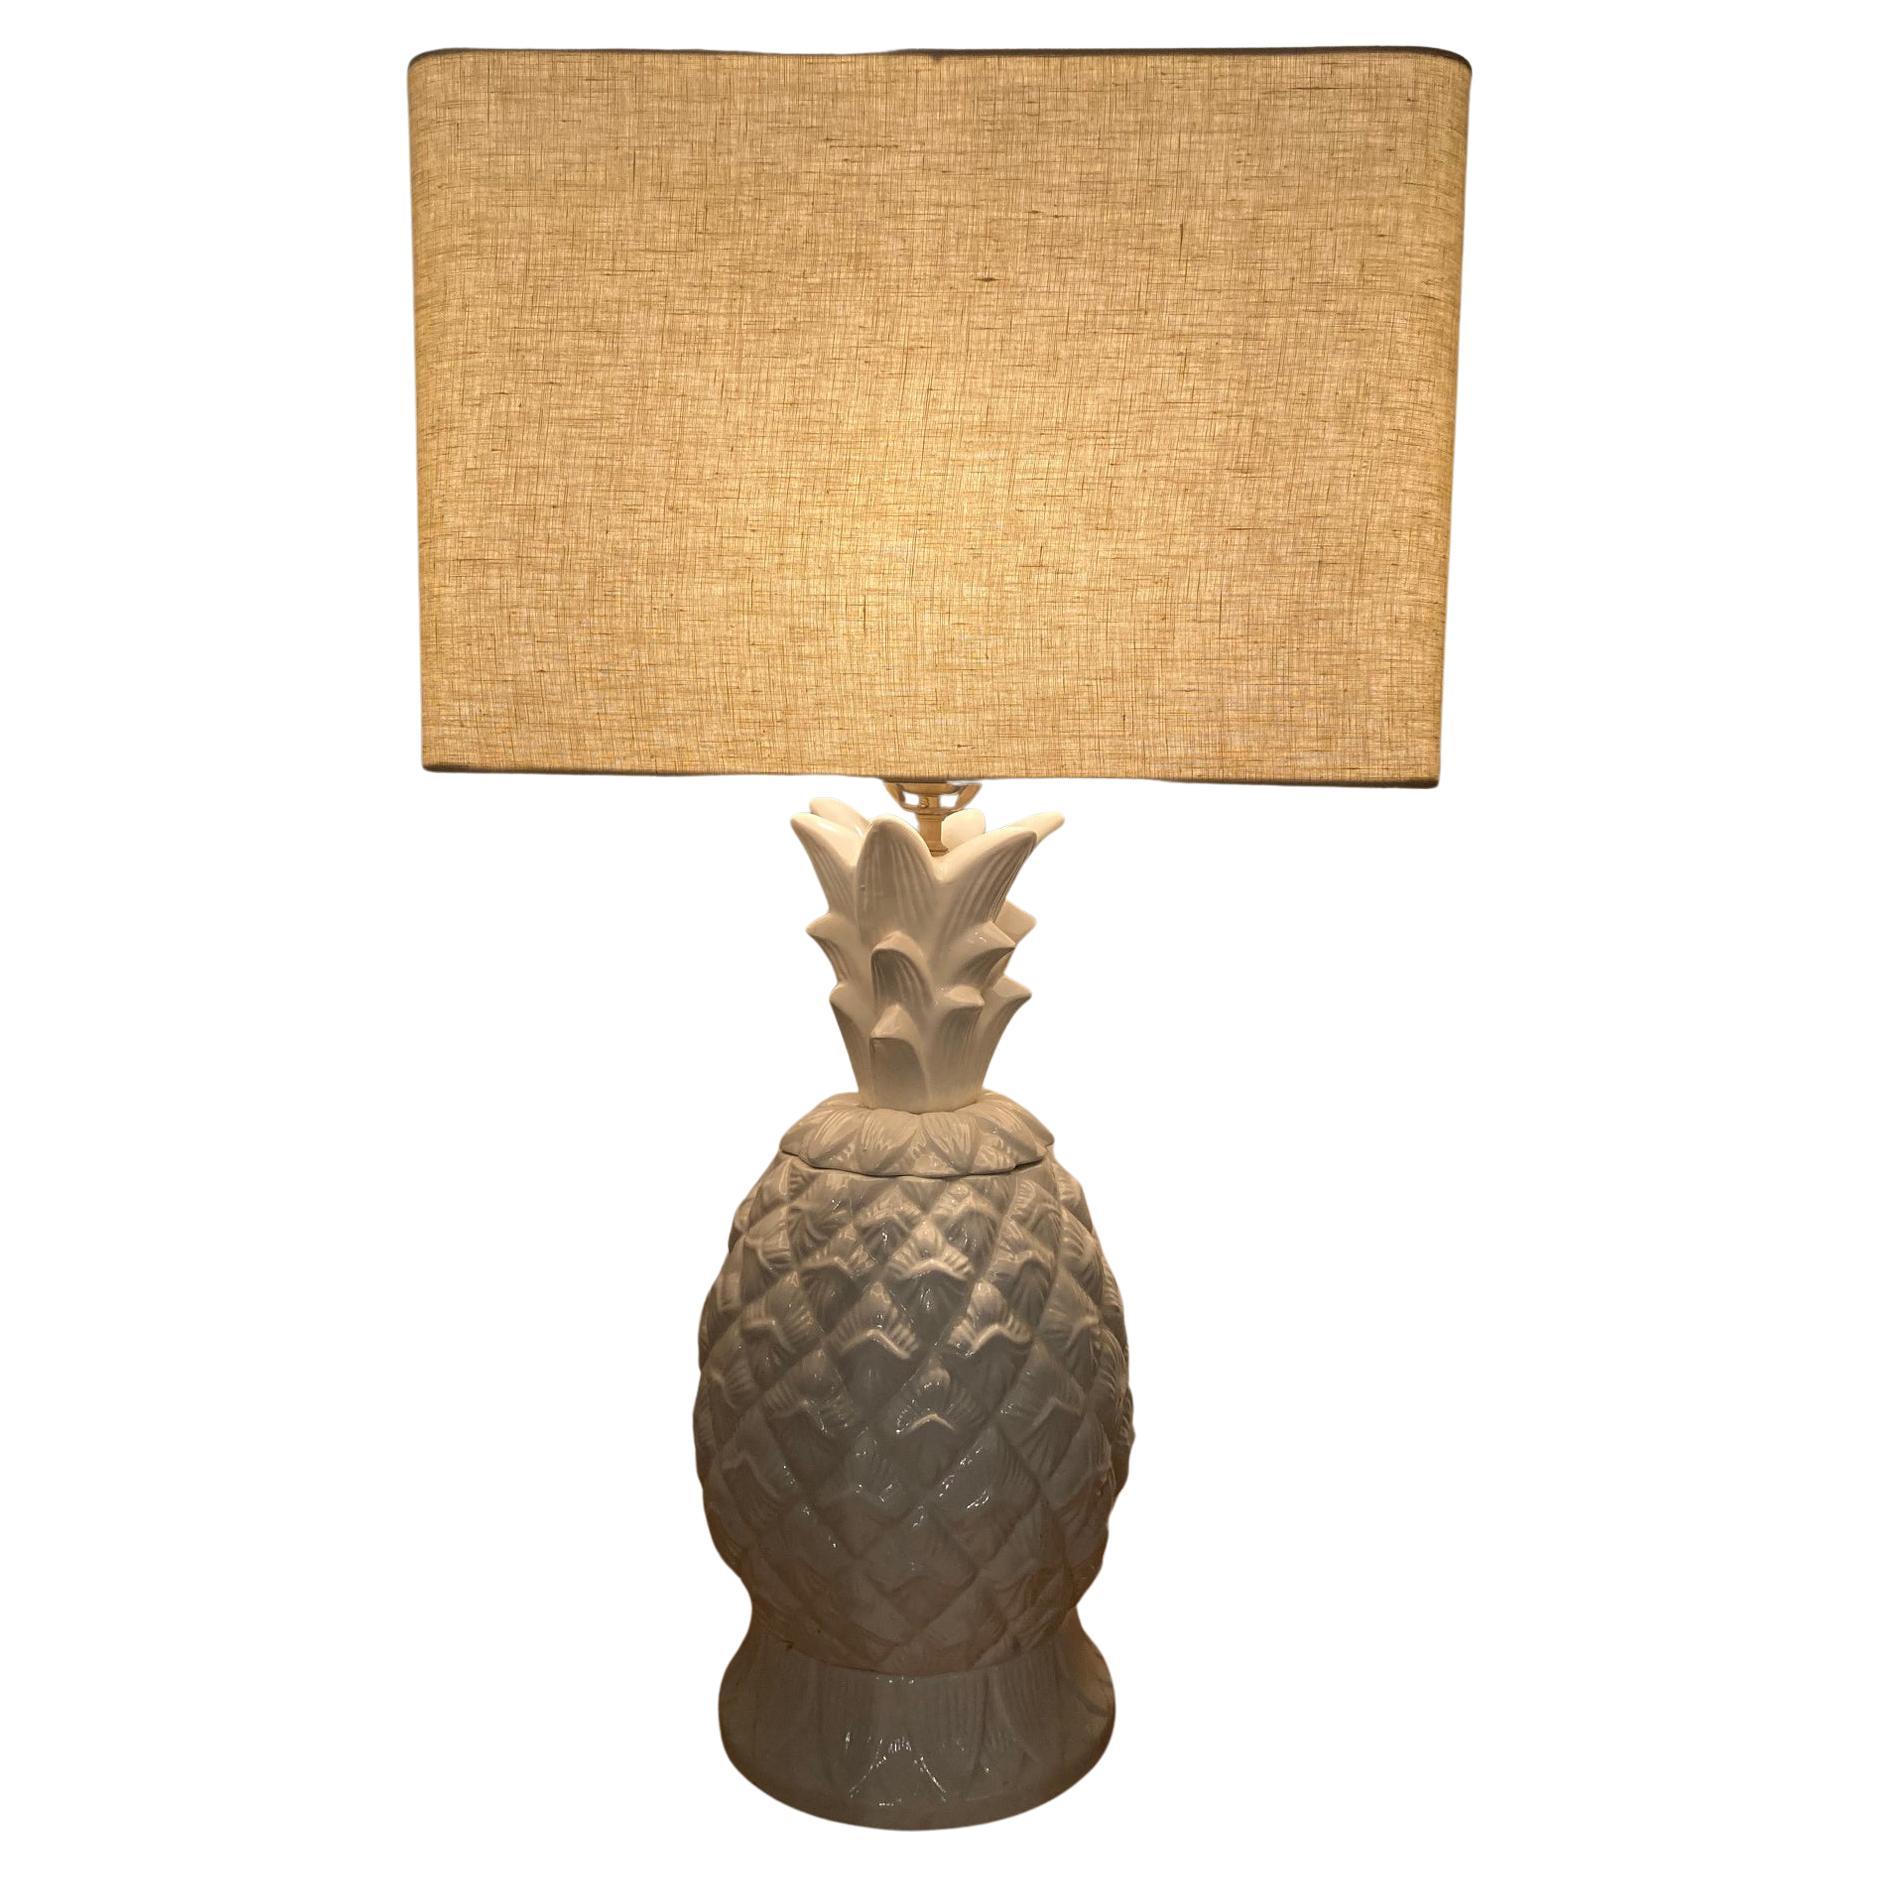 Vintage Pineapple Table Lamp For Sale